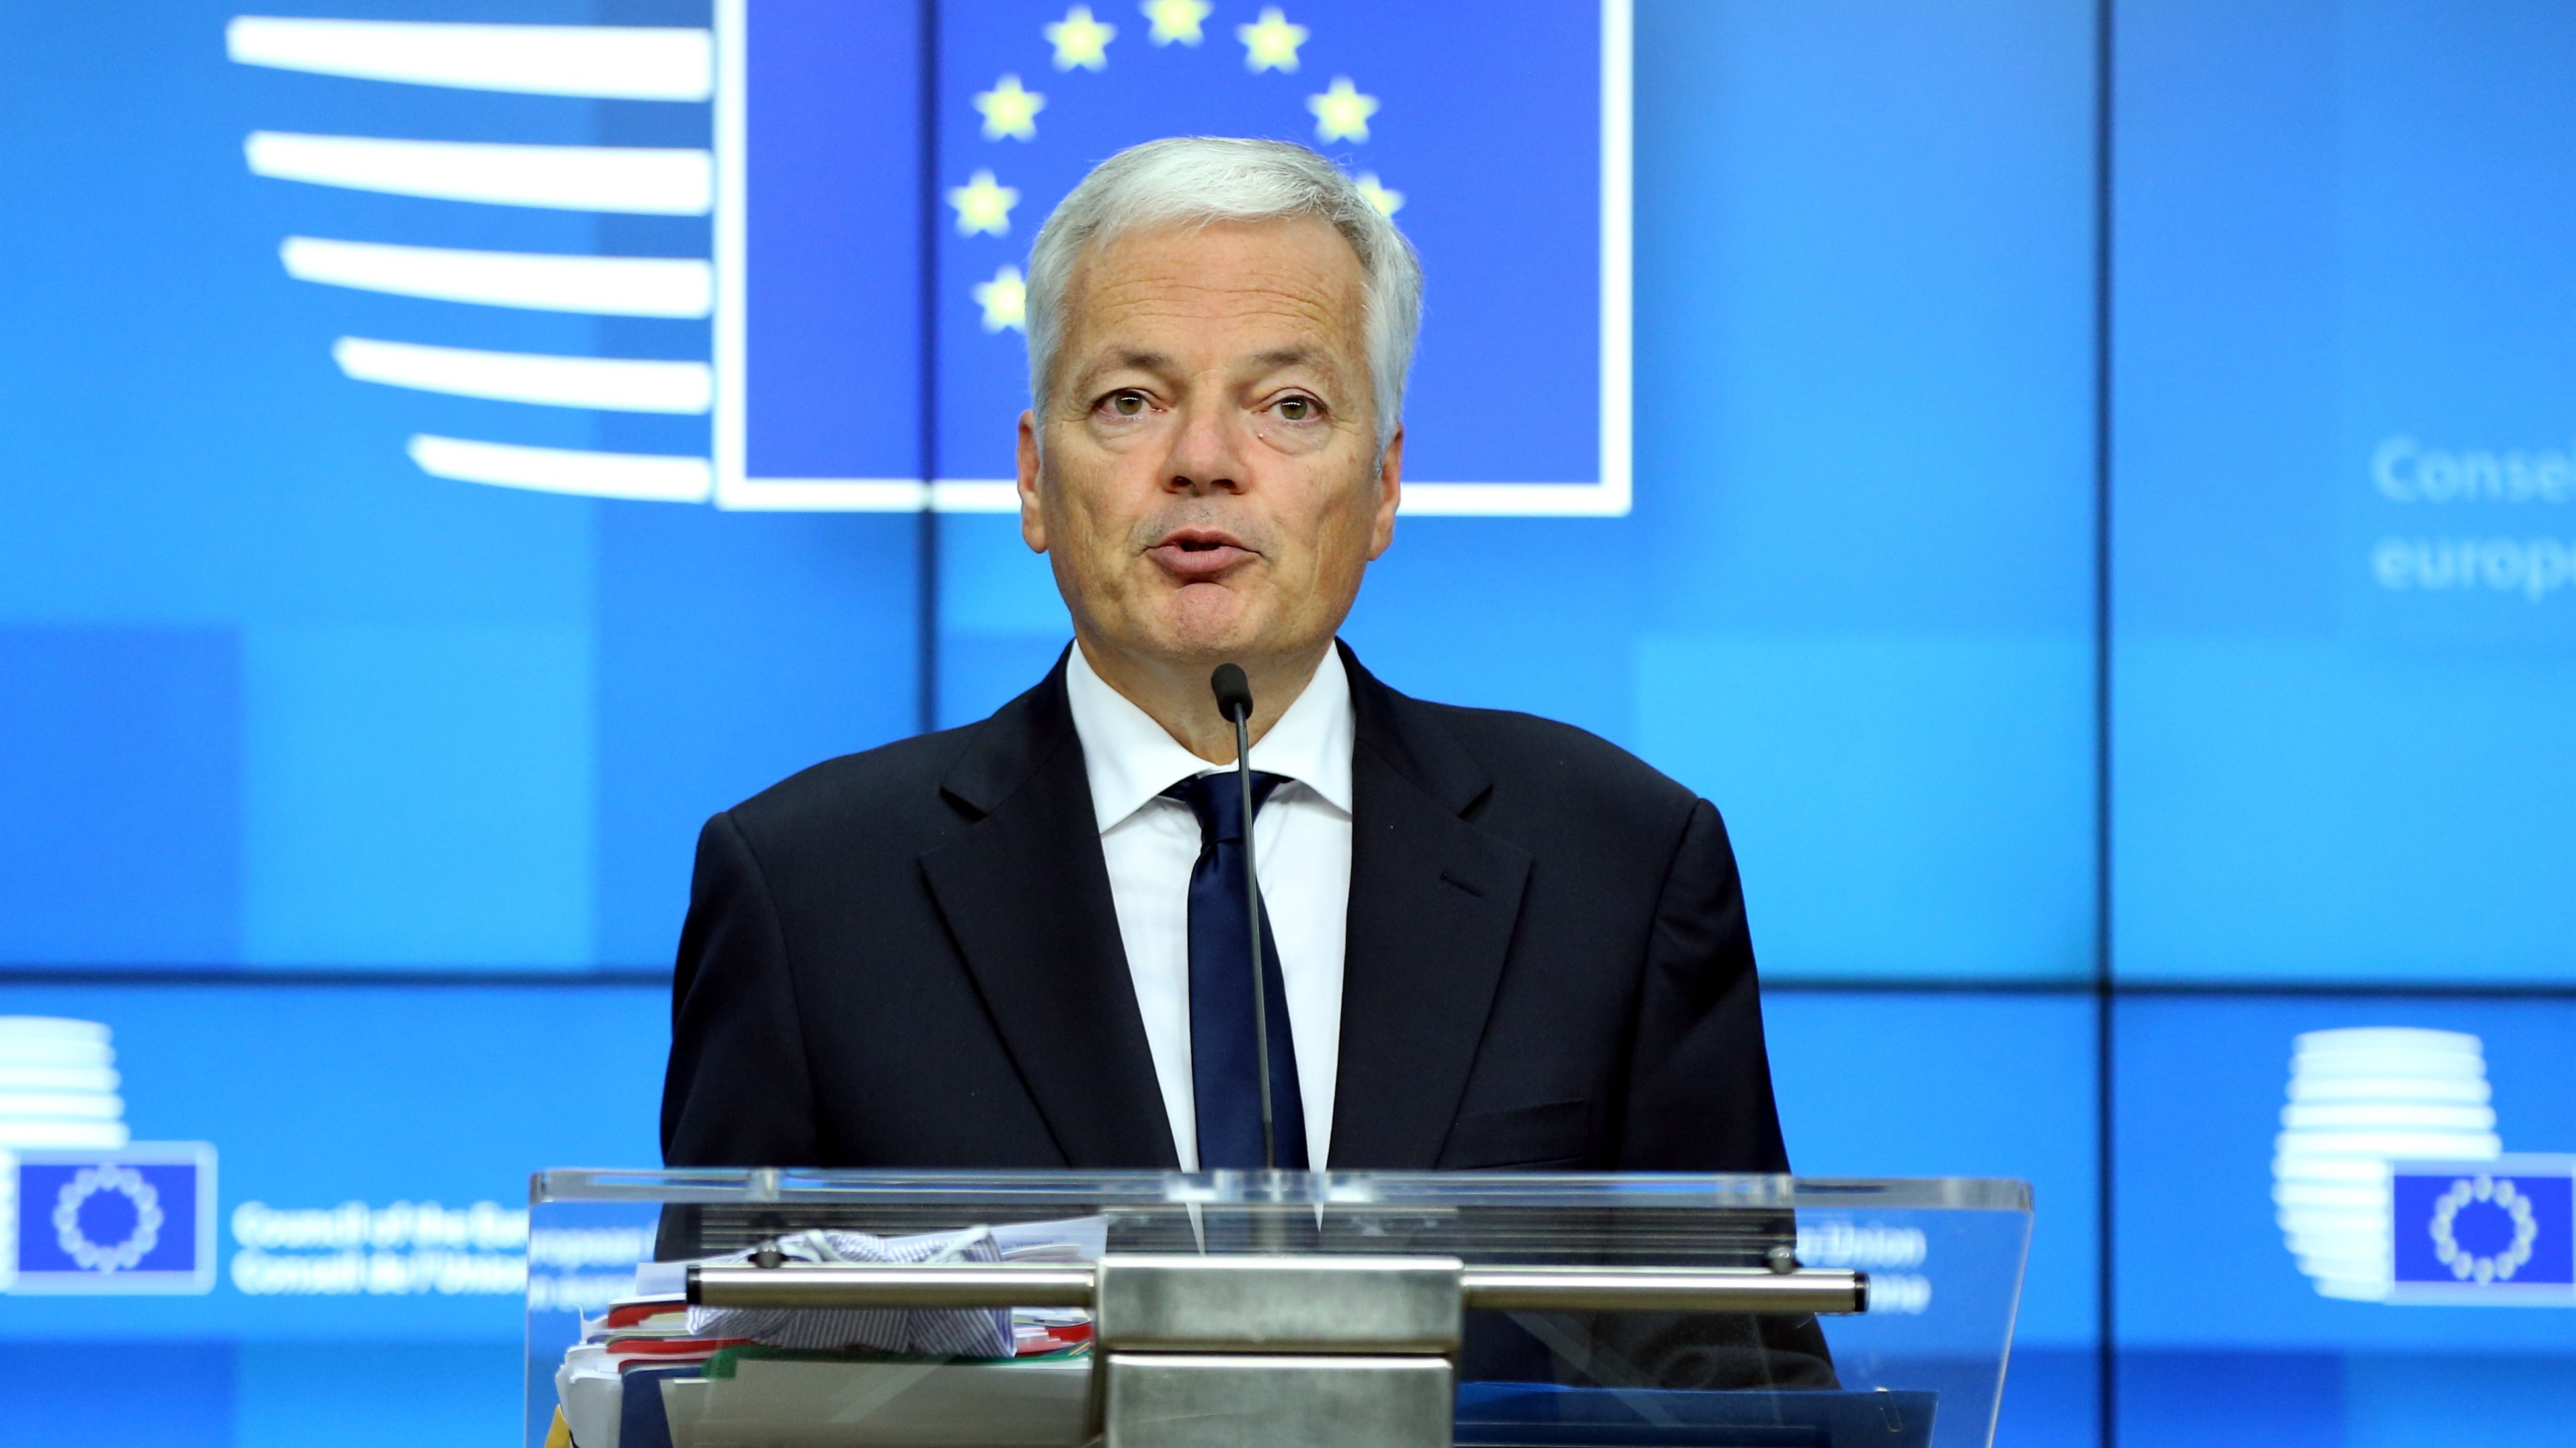 European Commissioner for Justice Didier Reynders press conference